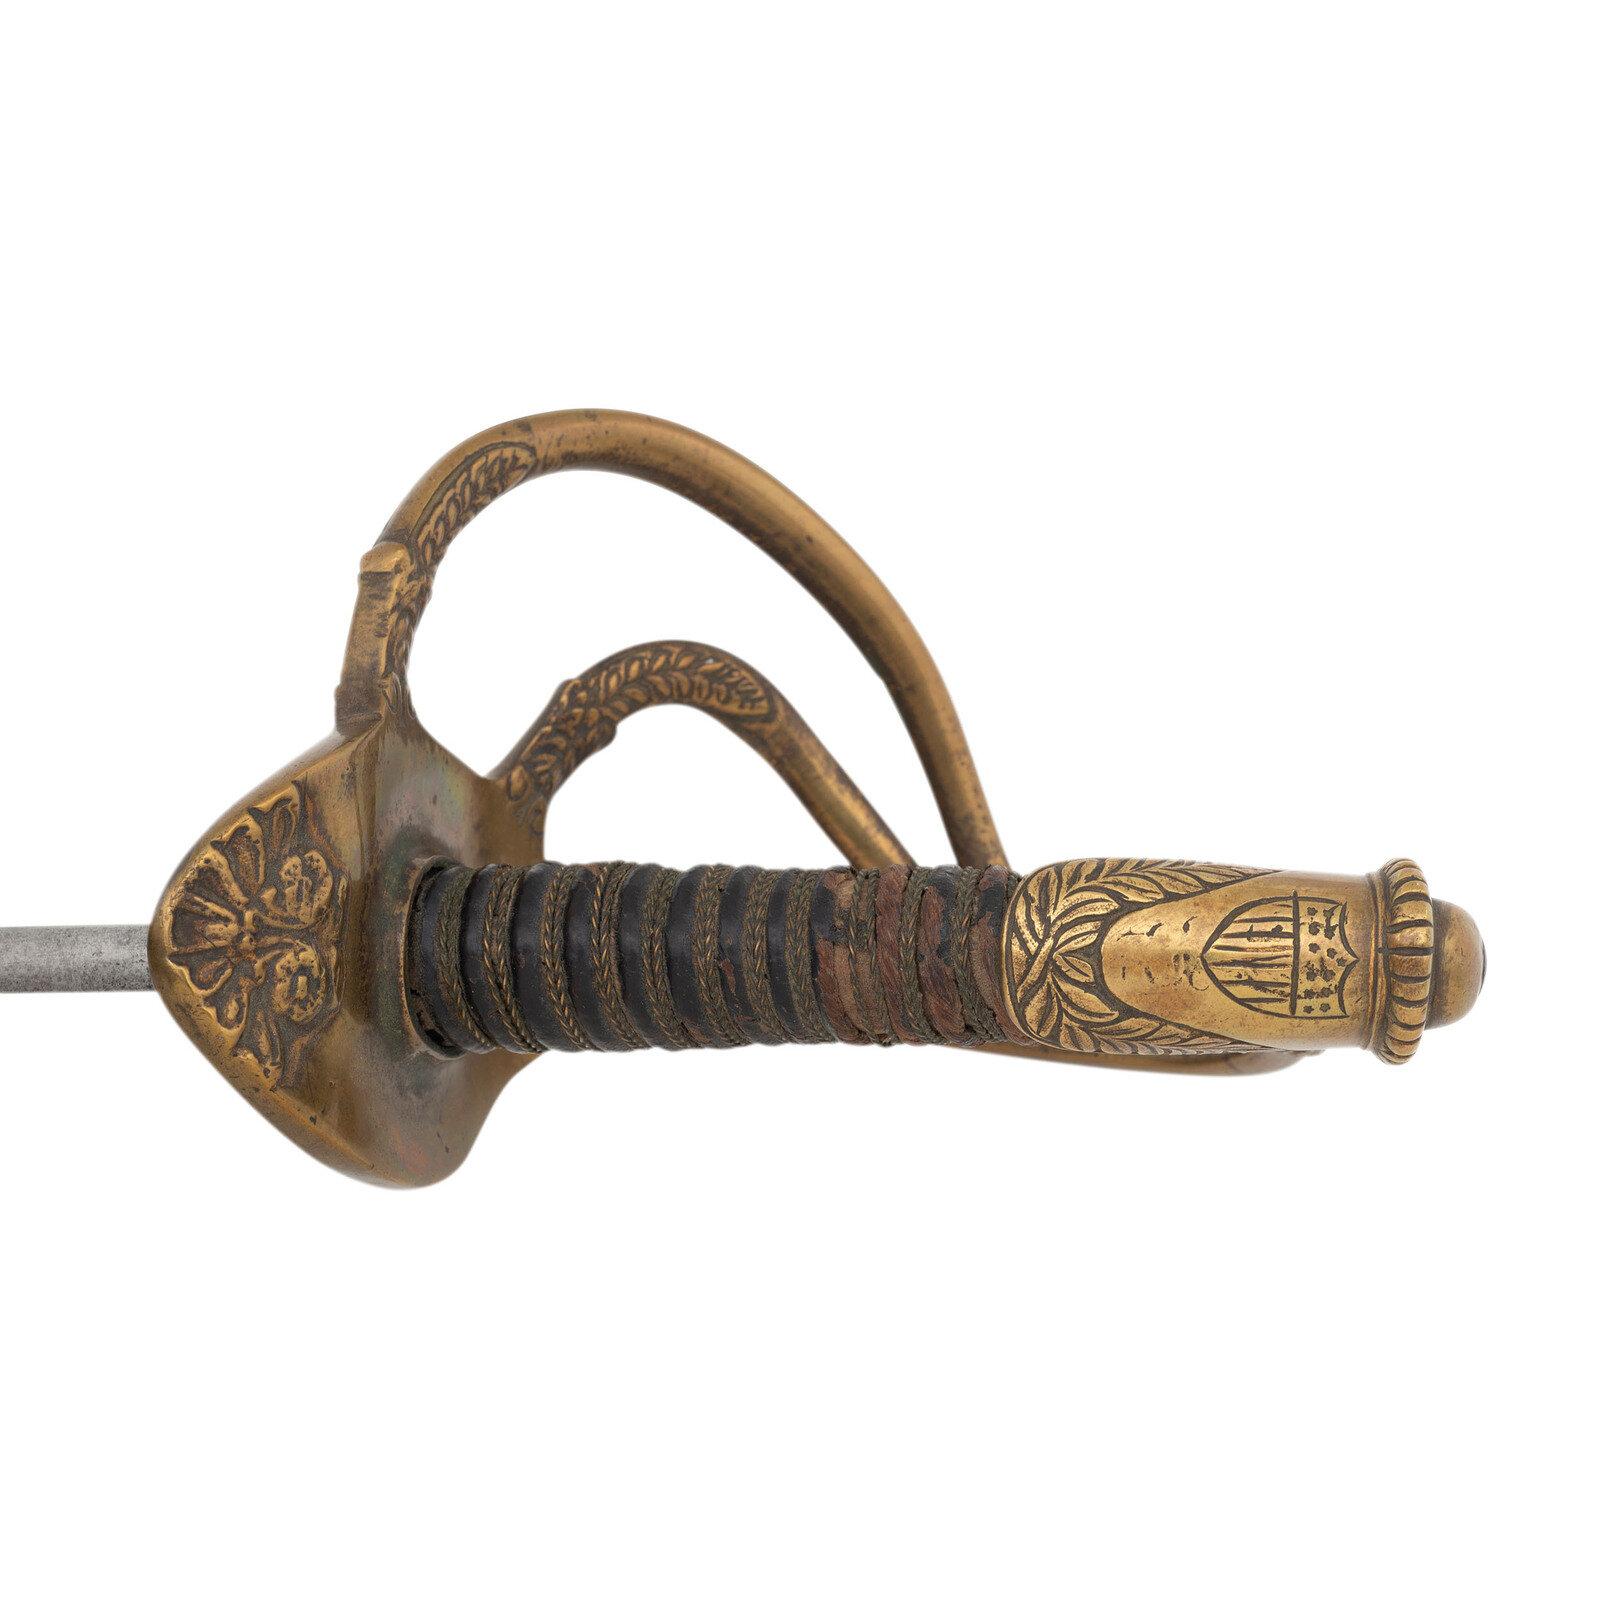 Imported 1840 Type Heavy Cavalry Officers Saber Presented to Lt. James Bradley- 131st NY Volunteers